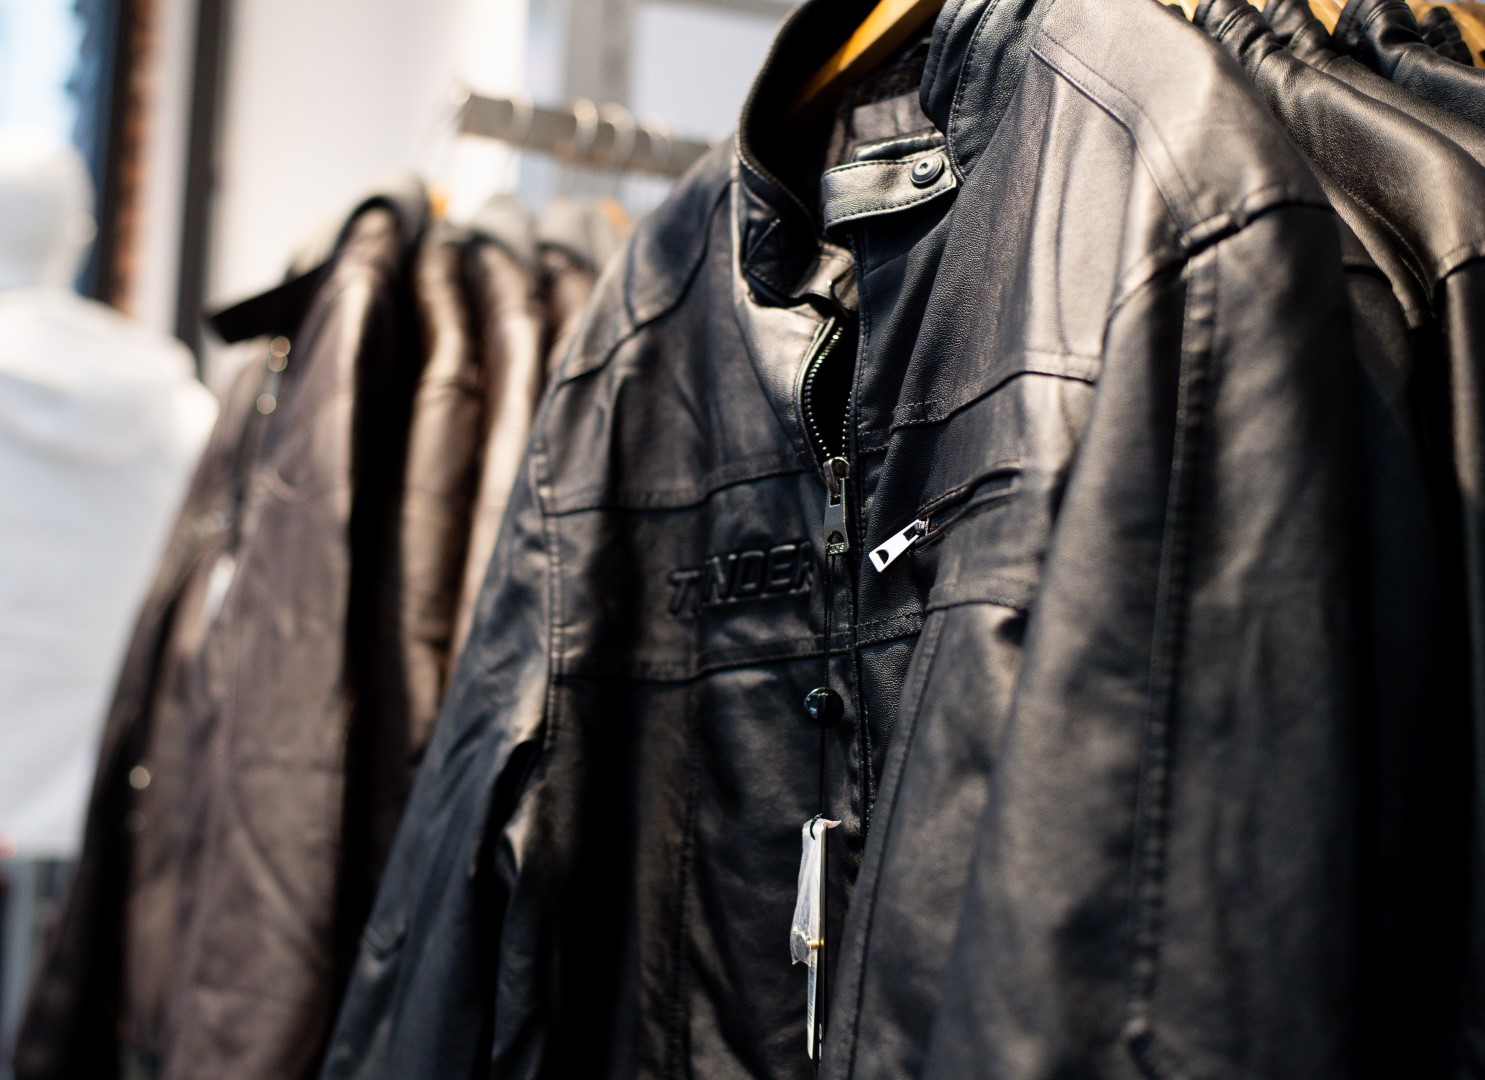 Close-up of black leather jackets hanging on a rack in a clothing store, focused on intricate zipper details and textures.